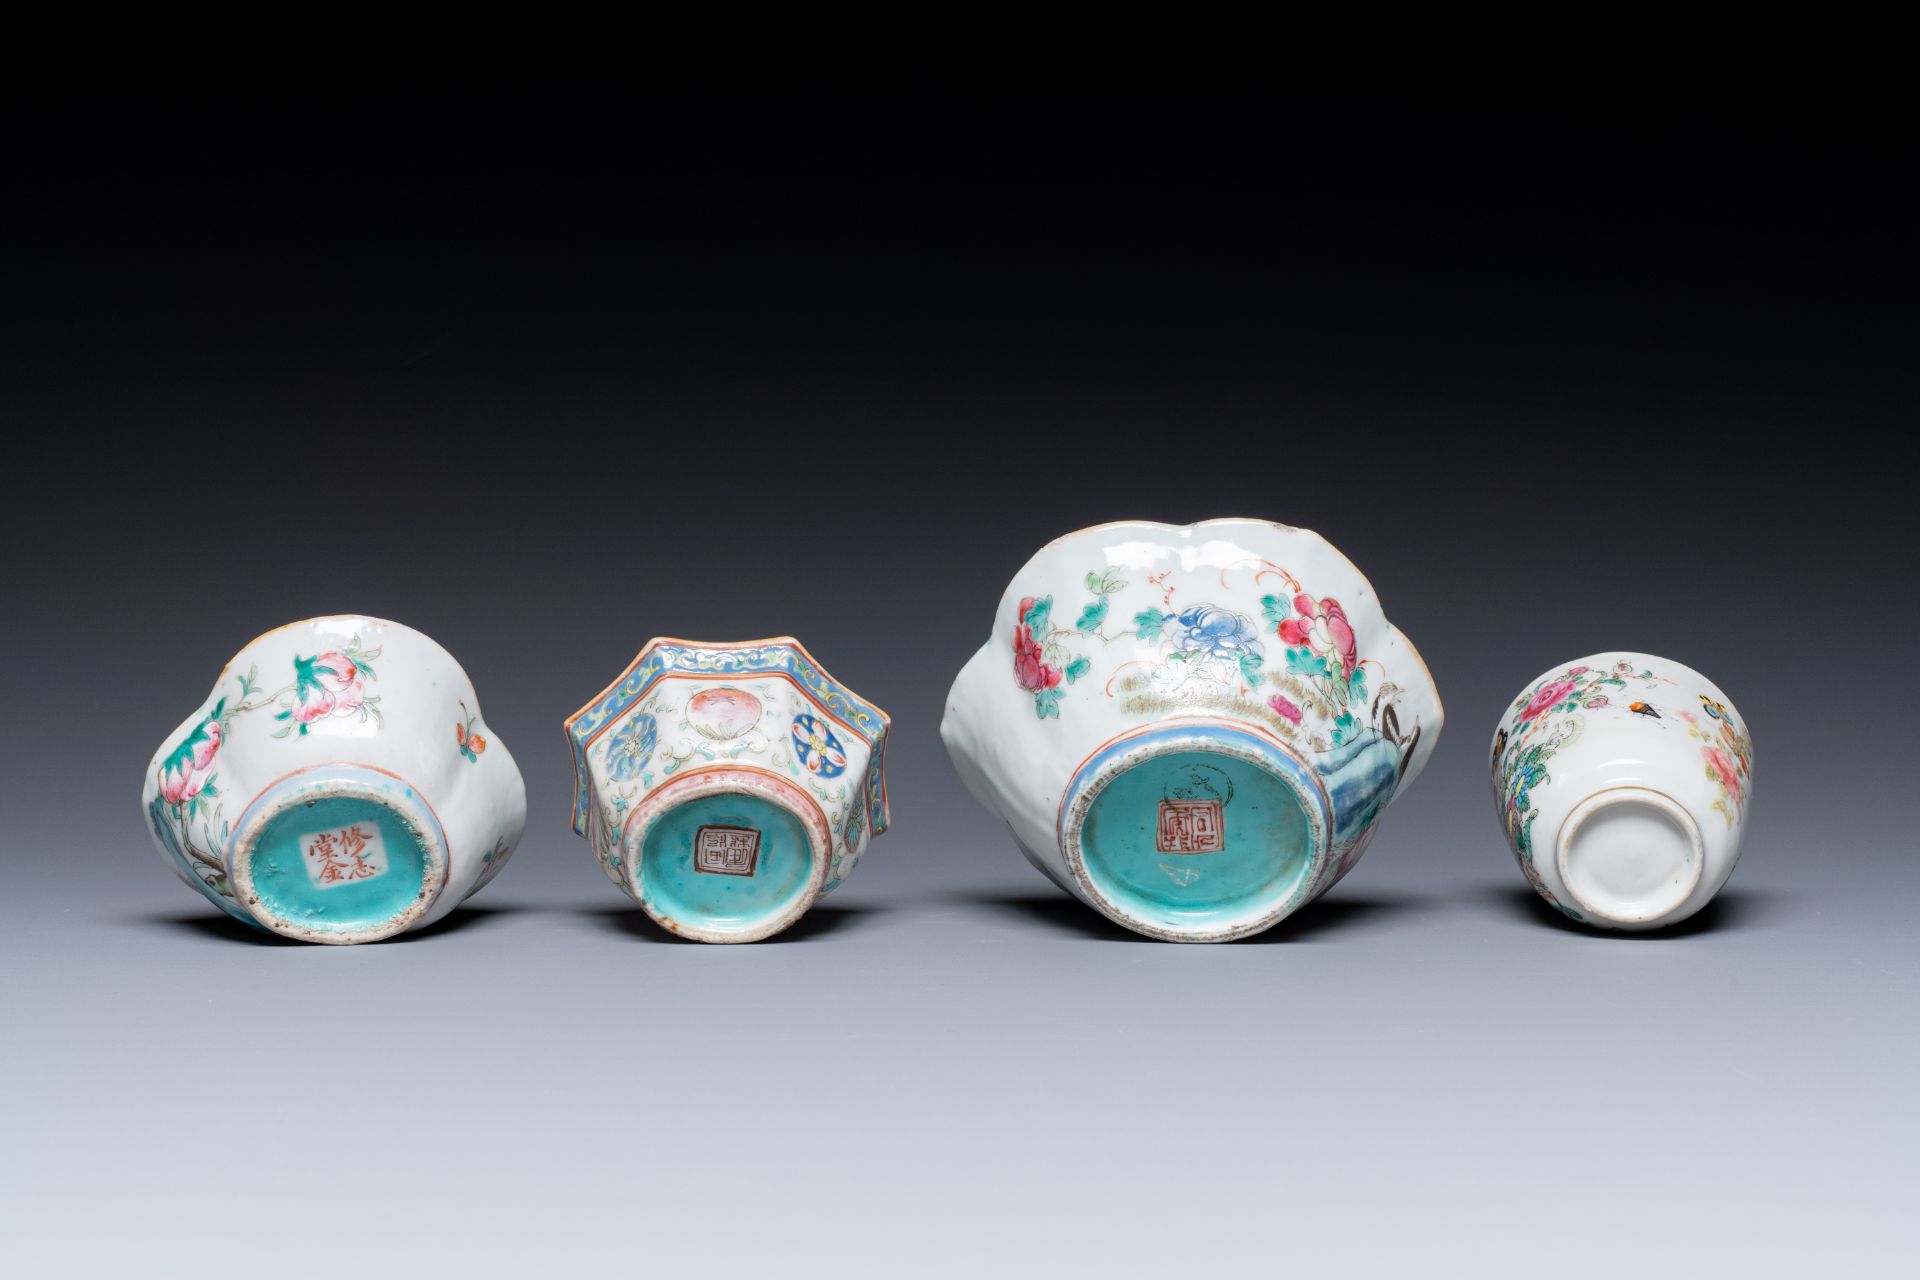 A varied collection of Chinese porcelain, 18/19th C. - Image 11 of 11